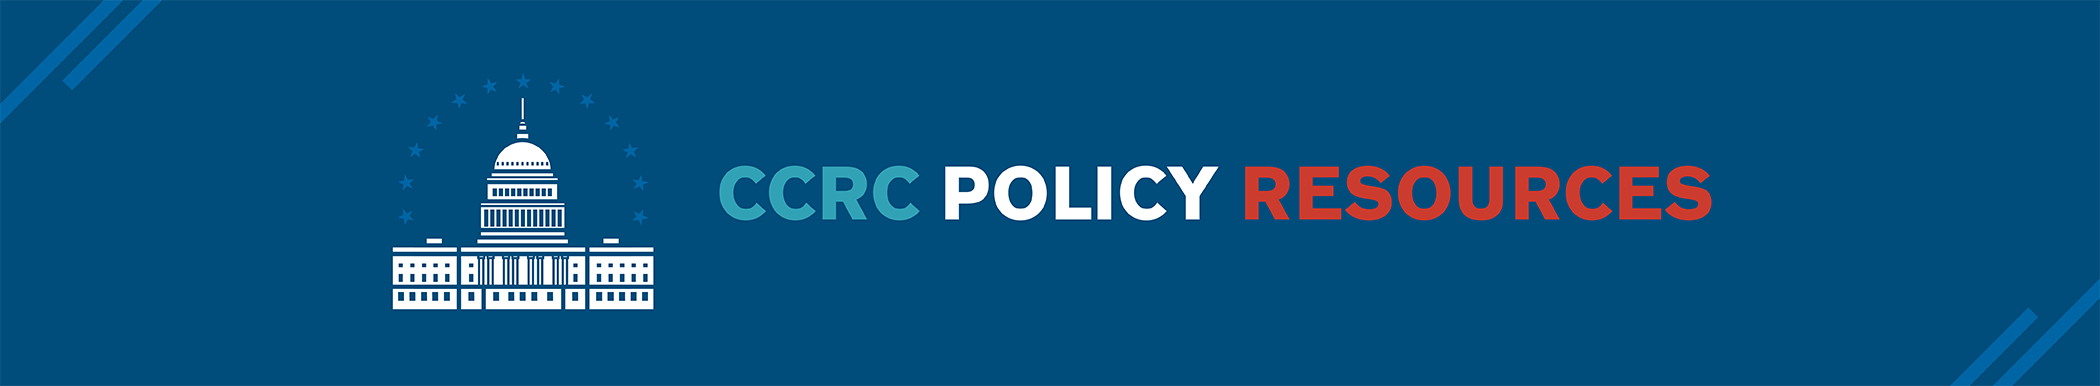 CCRC Policy Resources